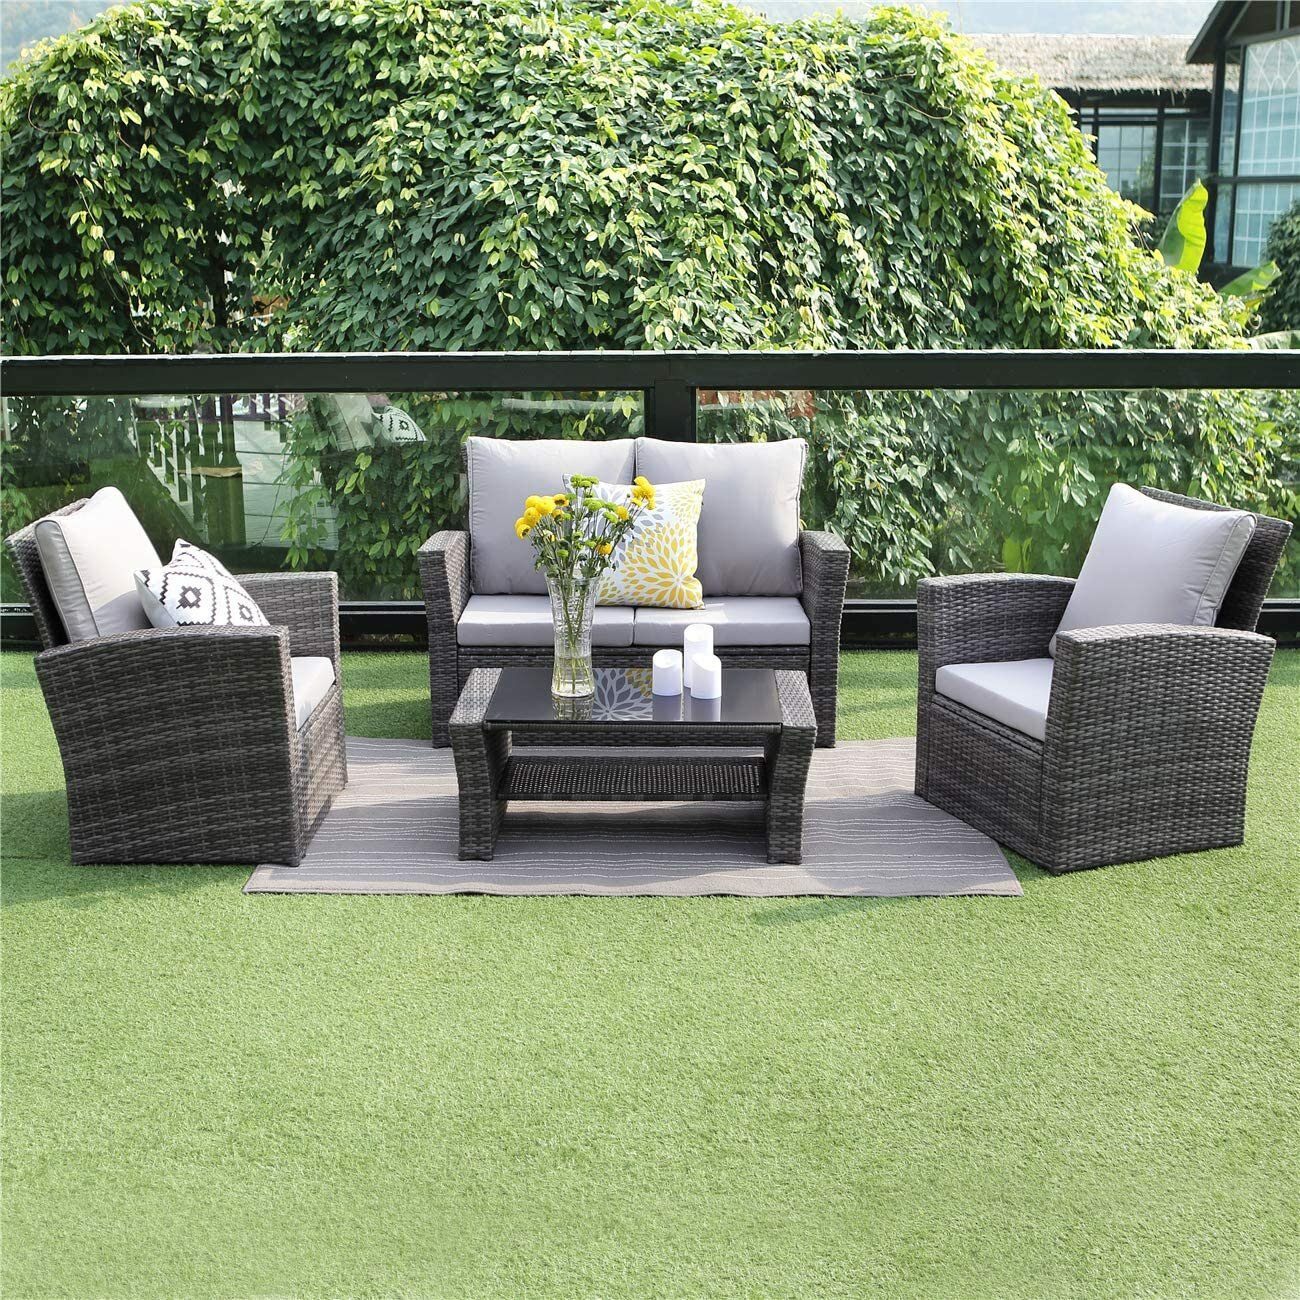 Netherside Wicker/Rattan 4 - Person Seating Group with Cushions, 2 Chair: Yes, Upgraded comfort: This contemporary outdoor sectional sofa comes with thick lofty sponge padded water-resistant - image 1 of 7